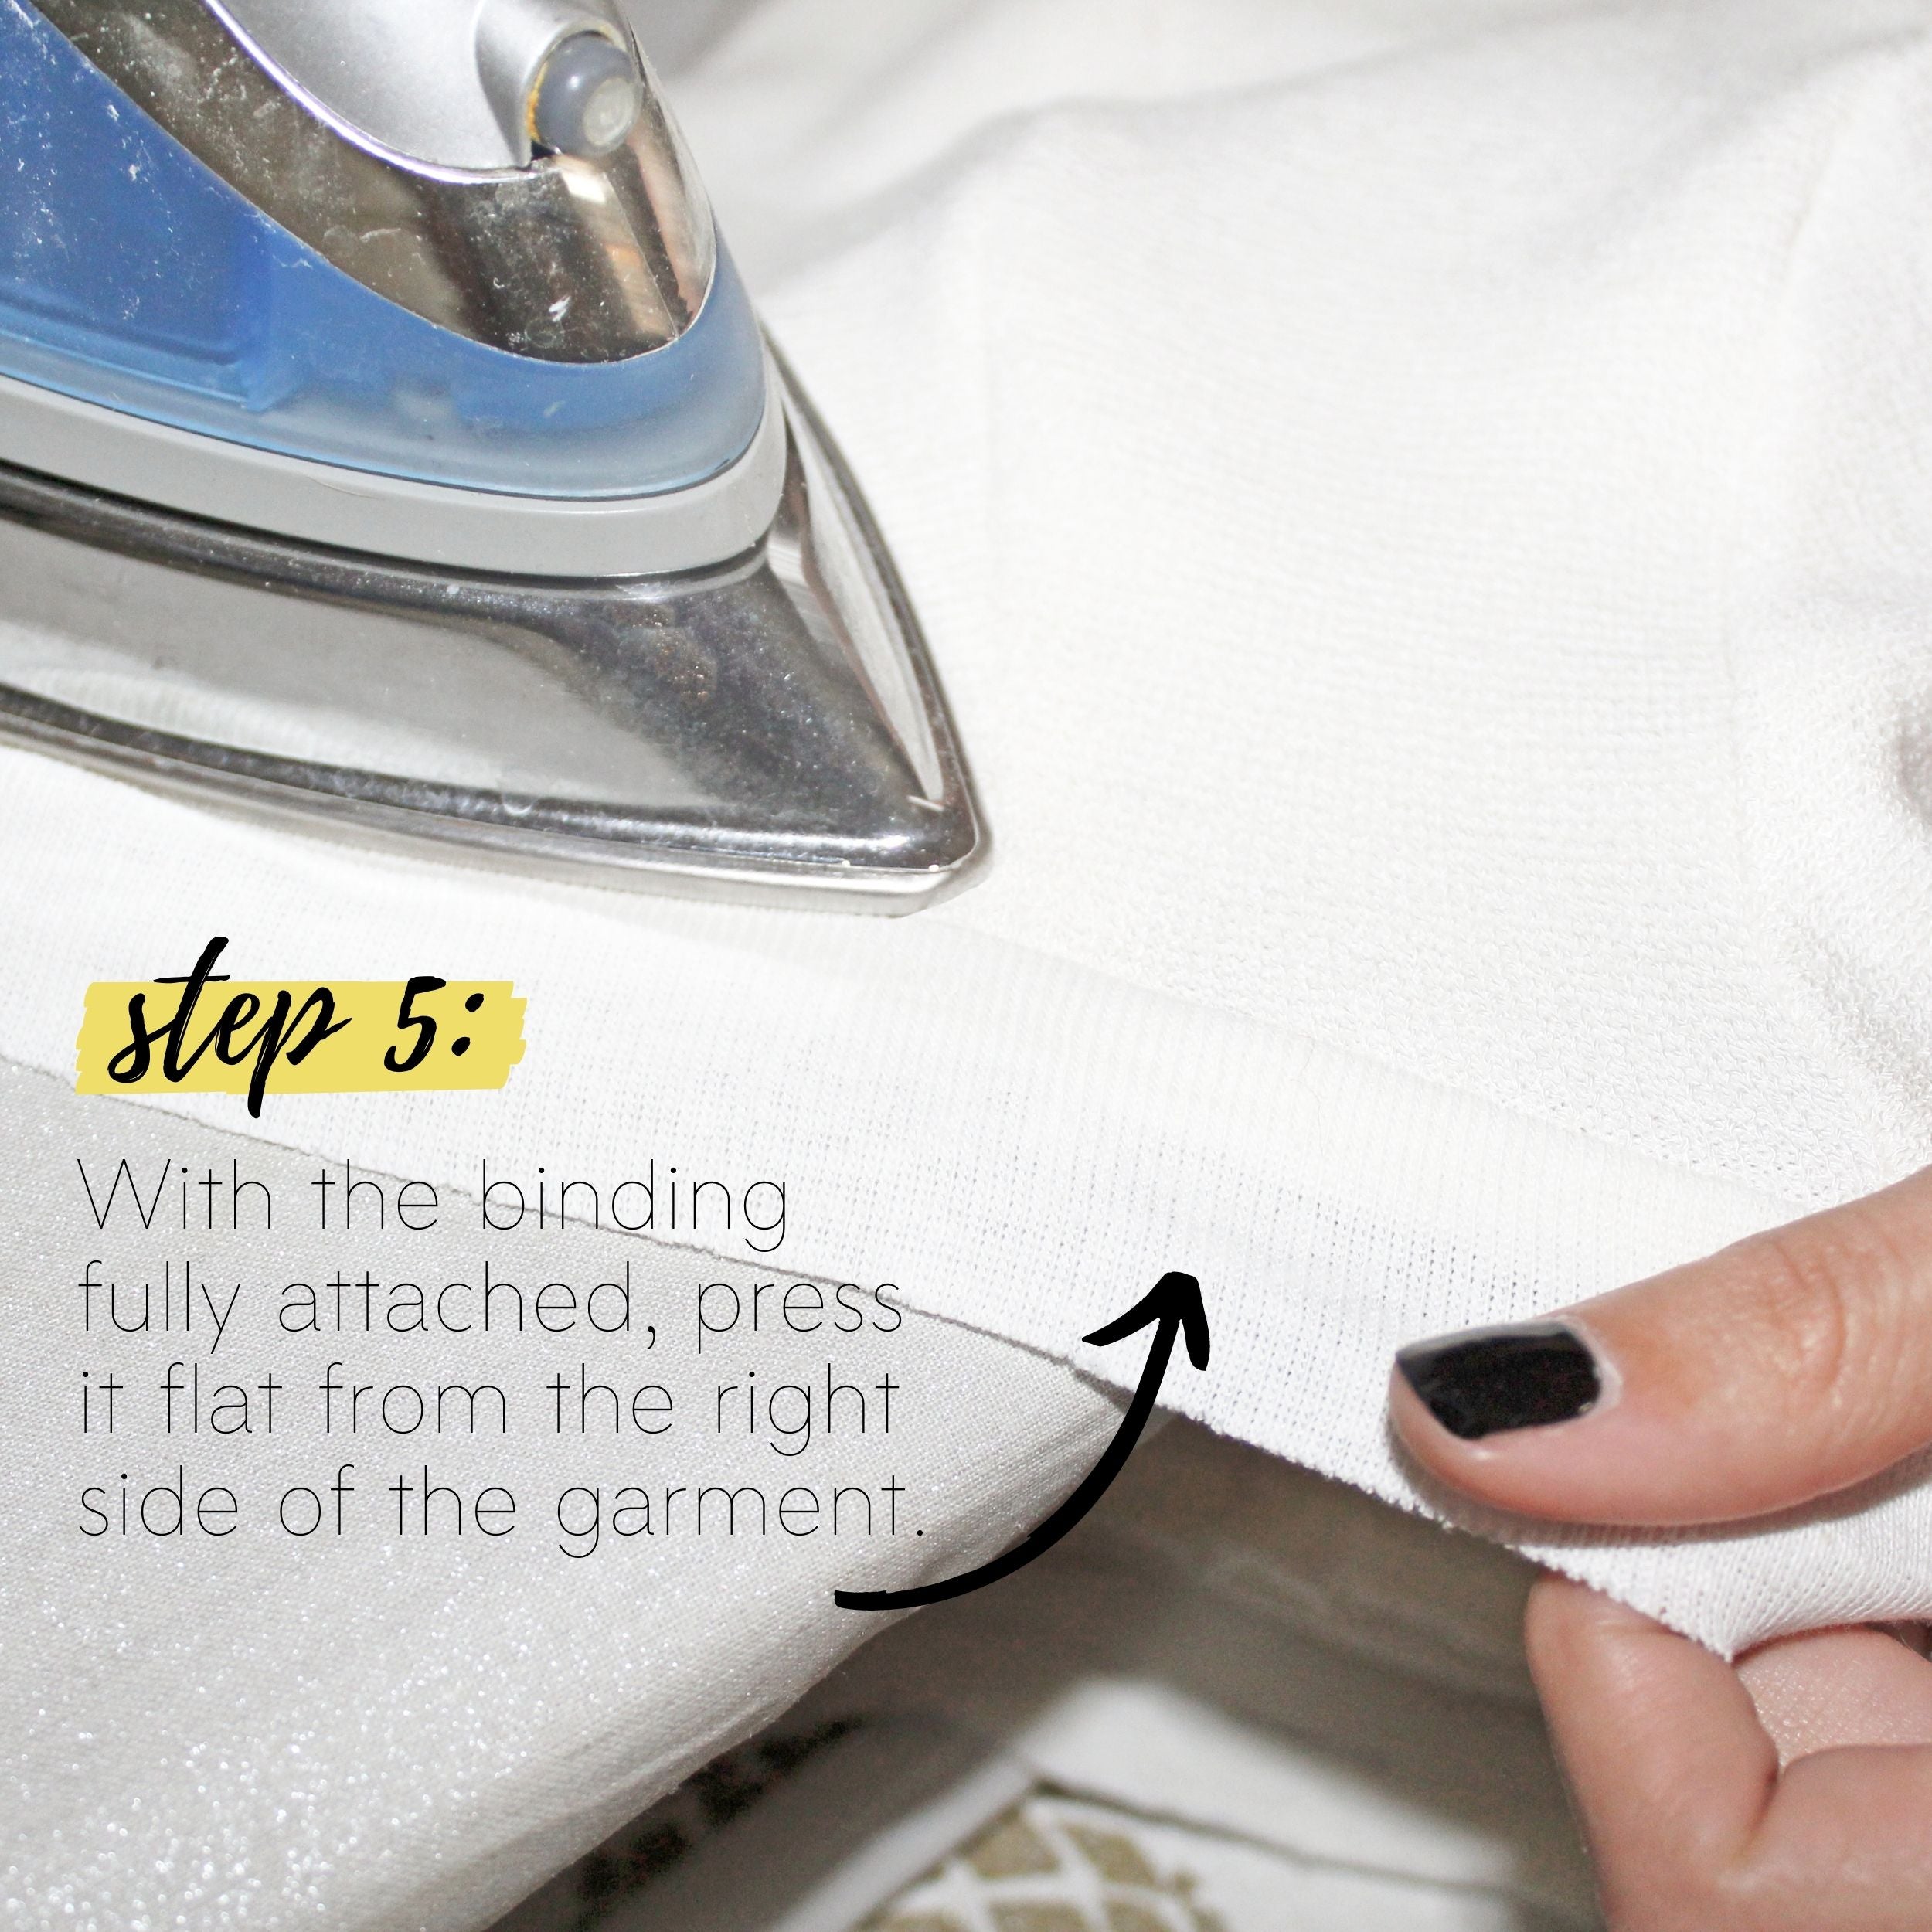 How To Sew A Knit Seam Binding Sewing Tutorial: Step 5